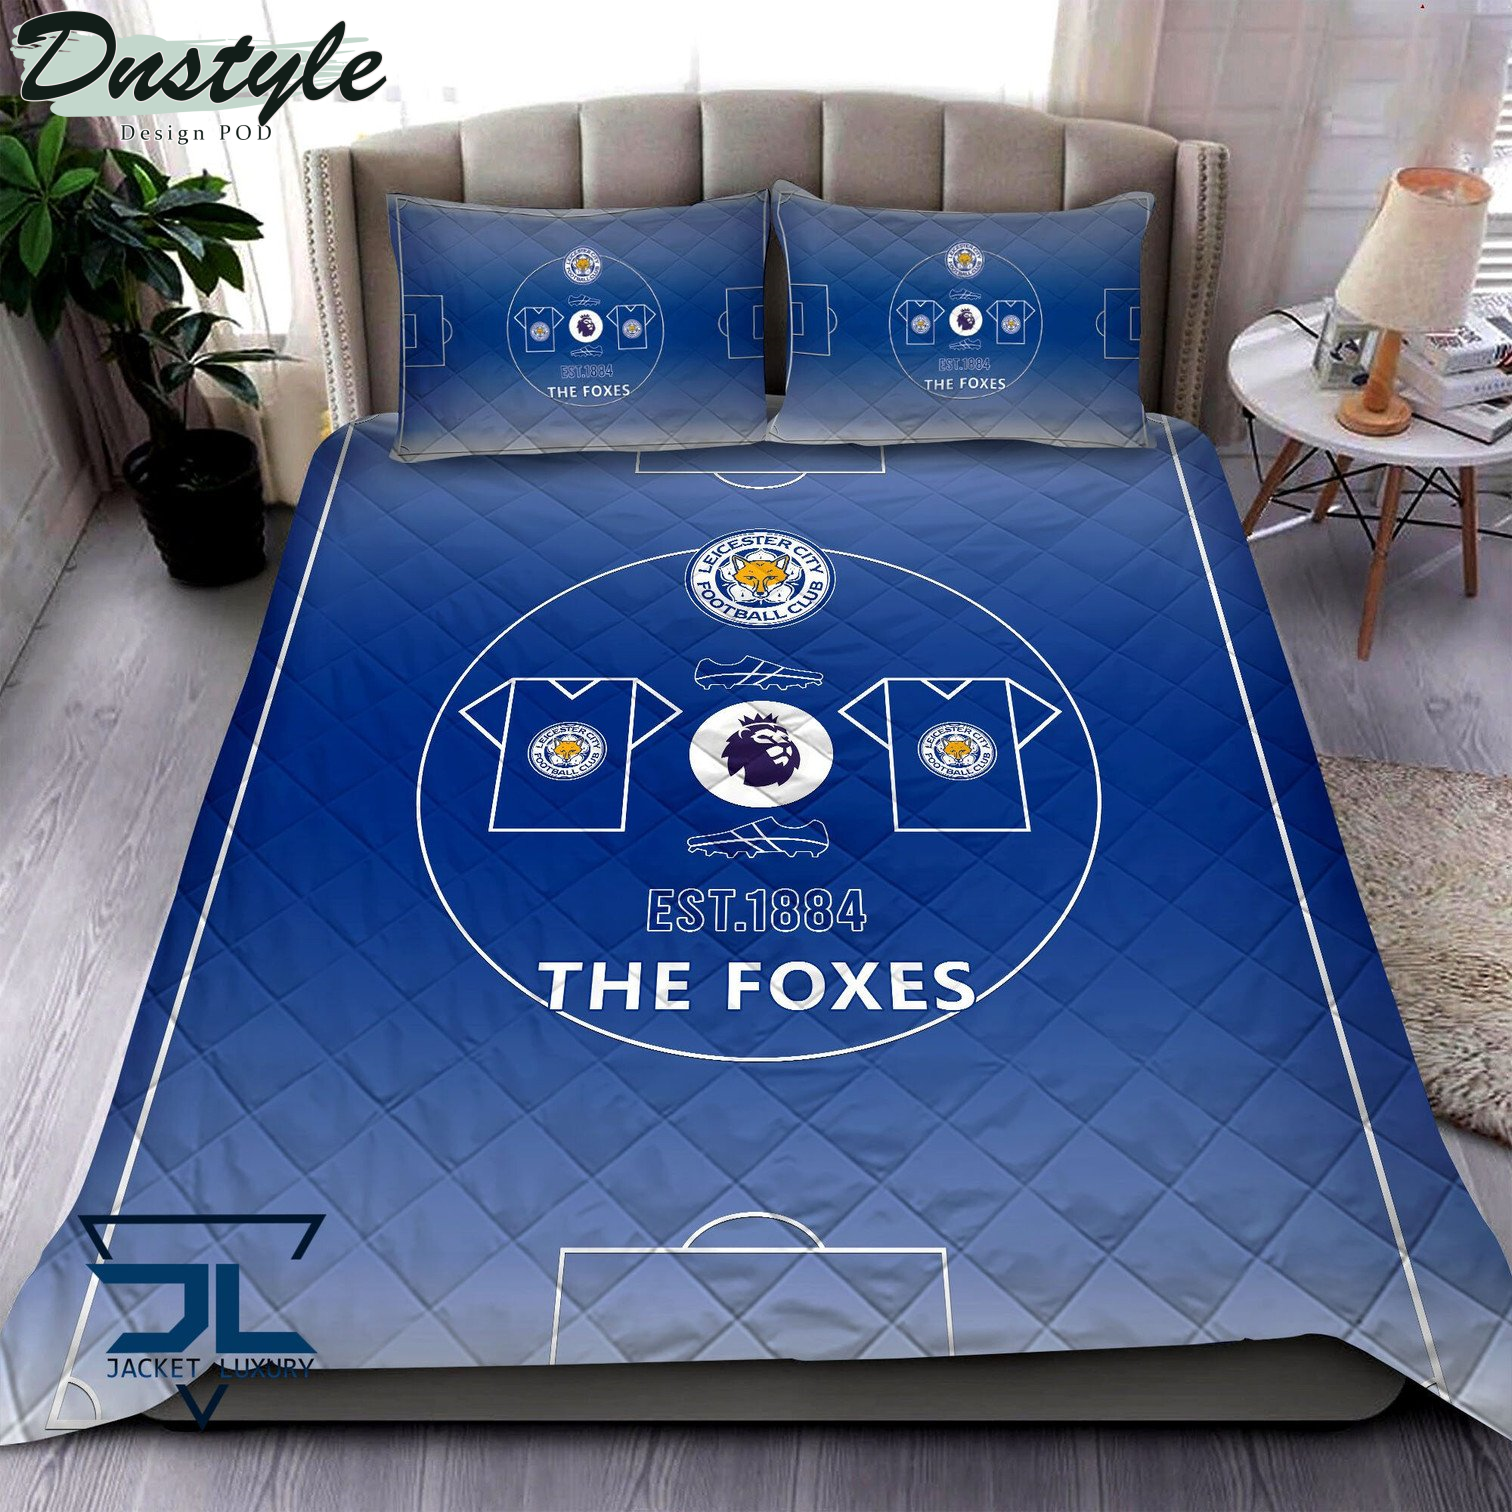 Leicester City F.C The Foxes Bedding Set